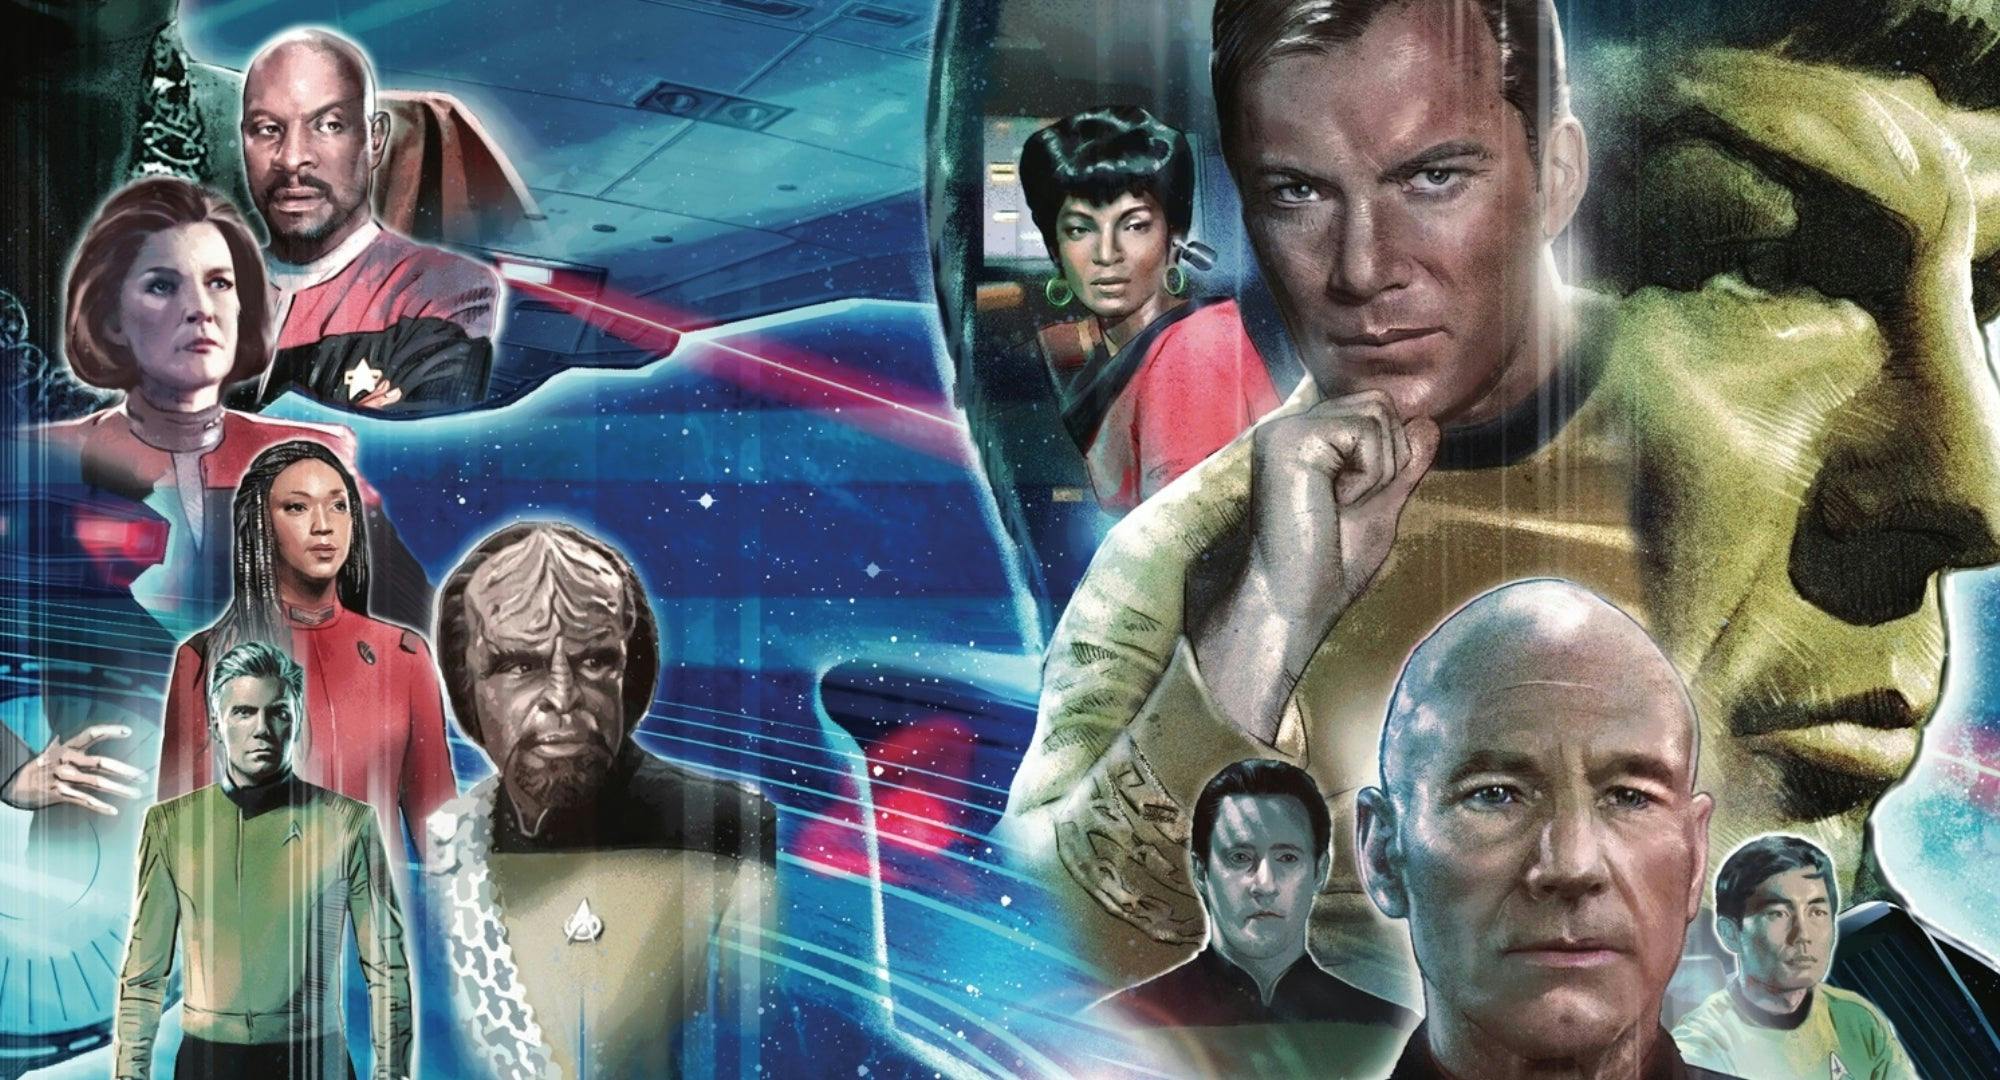 A collage of Star Trek characters from a variety of shows, including Spock, Kirk, Picard, and Worf.